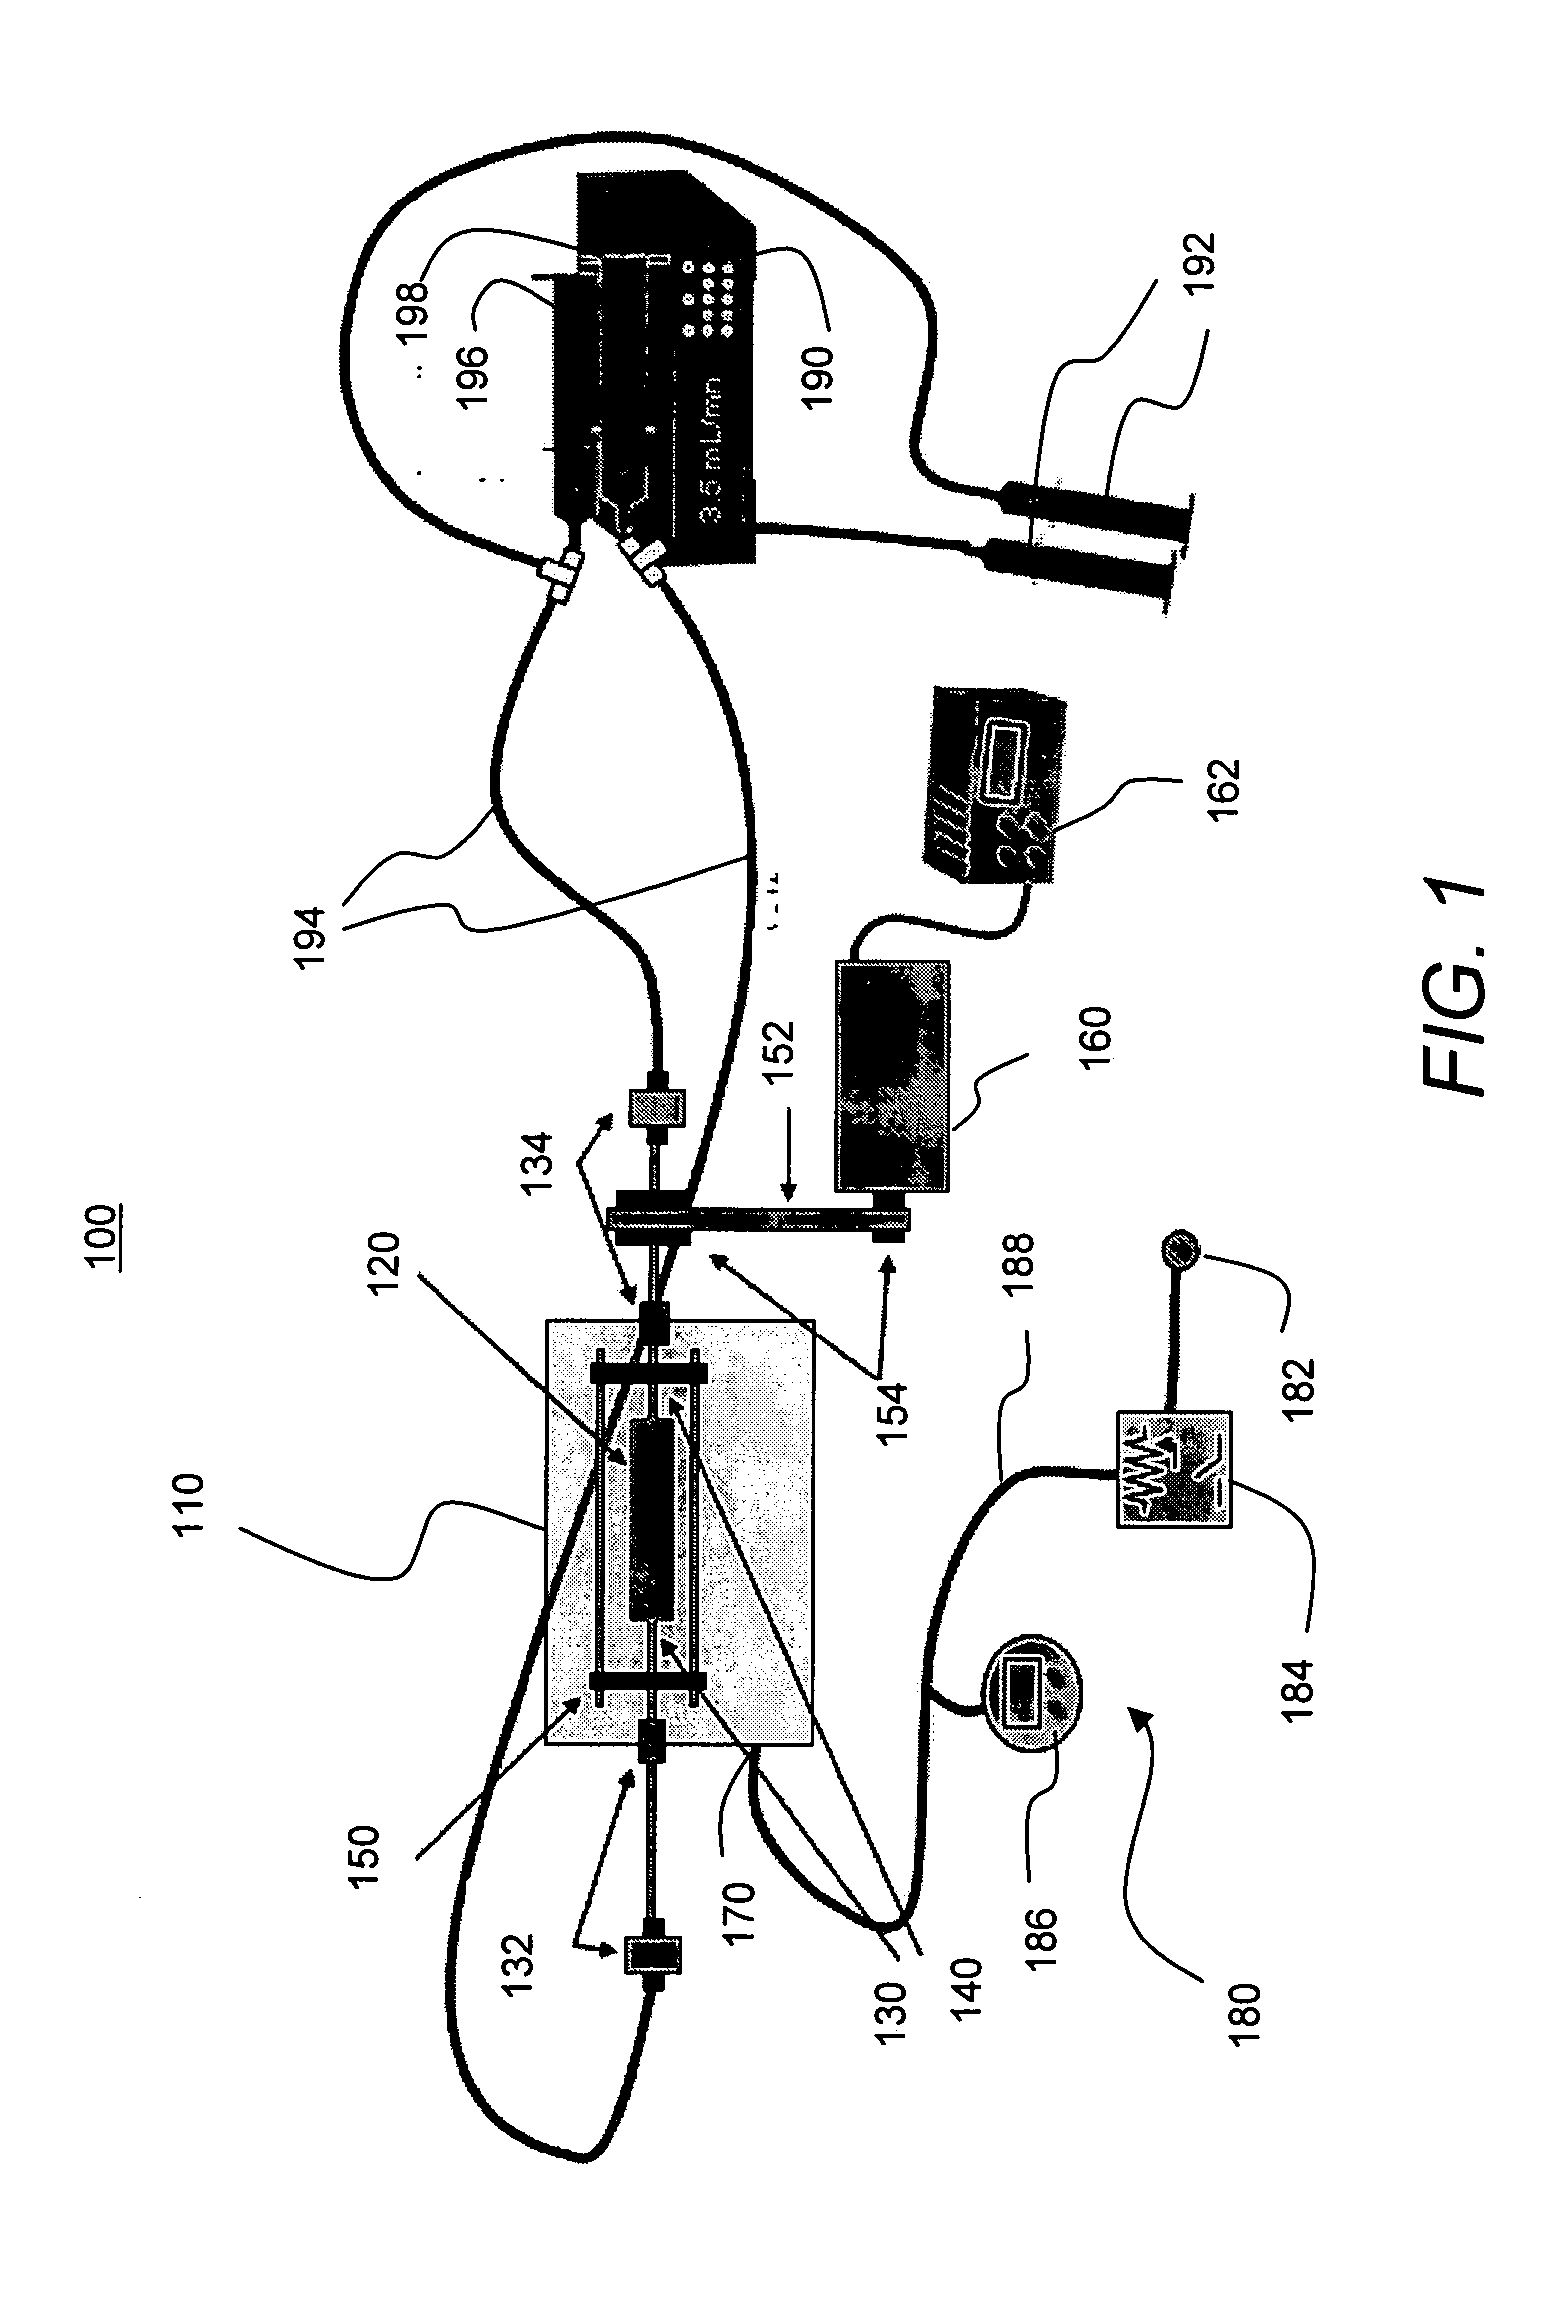 Vacuum rotational seeding and loading device and method for same